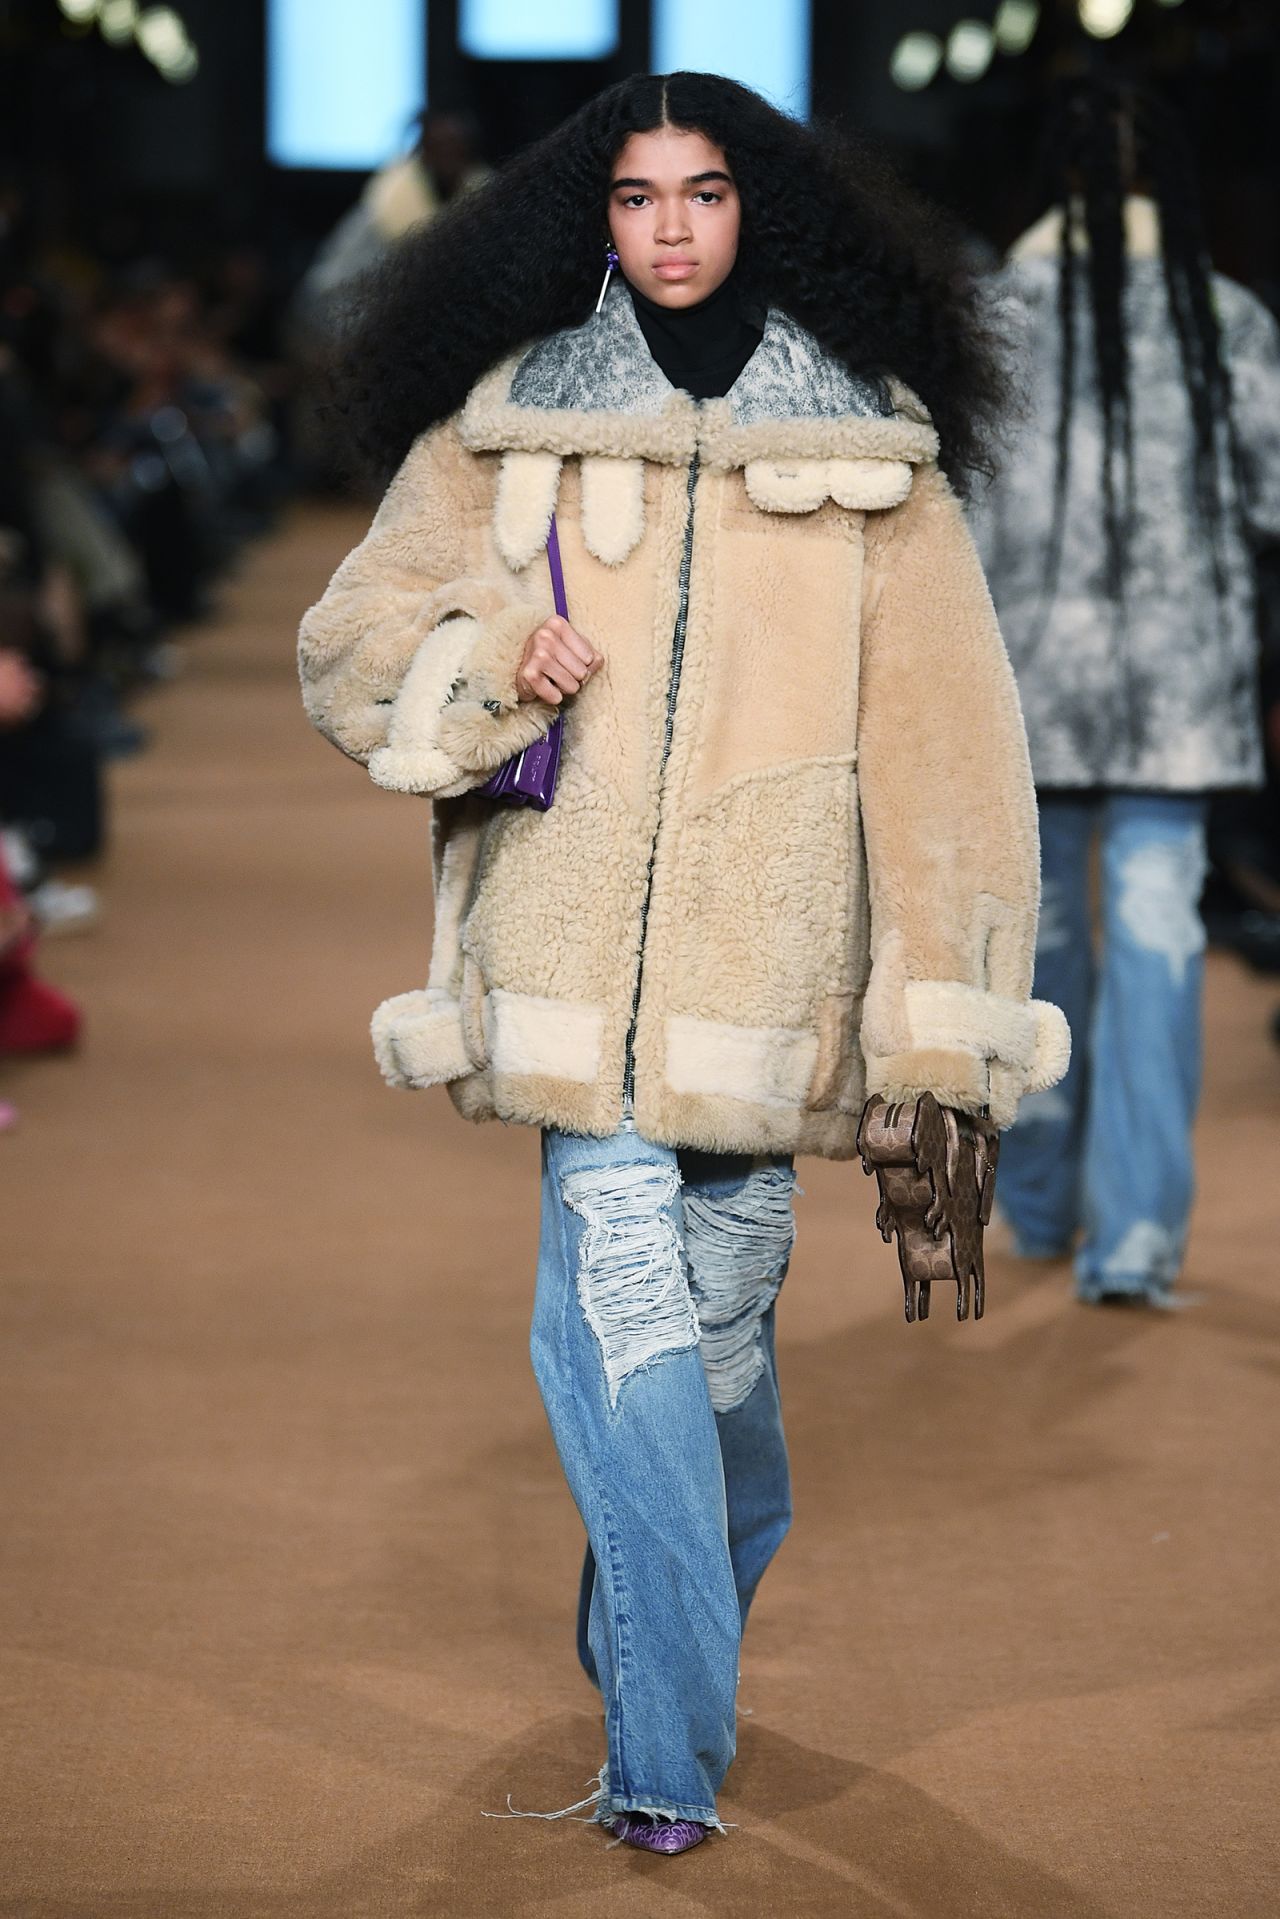 Coach's latest outing celebrated a new generation of classic American styles, including shearling coats, denim skirts, leather jackets and patent mini backpacks.